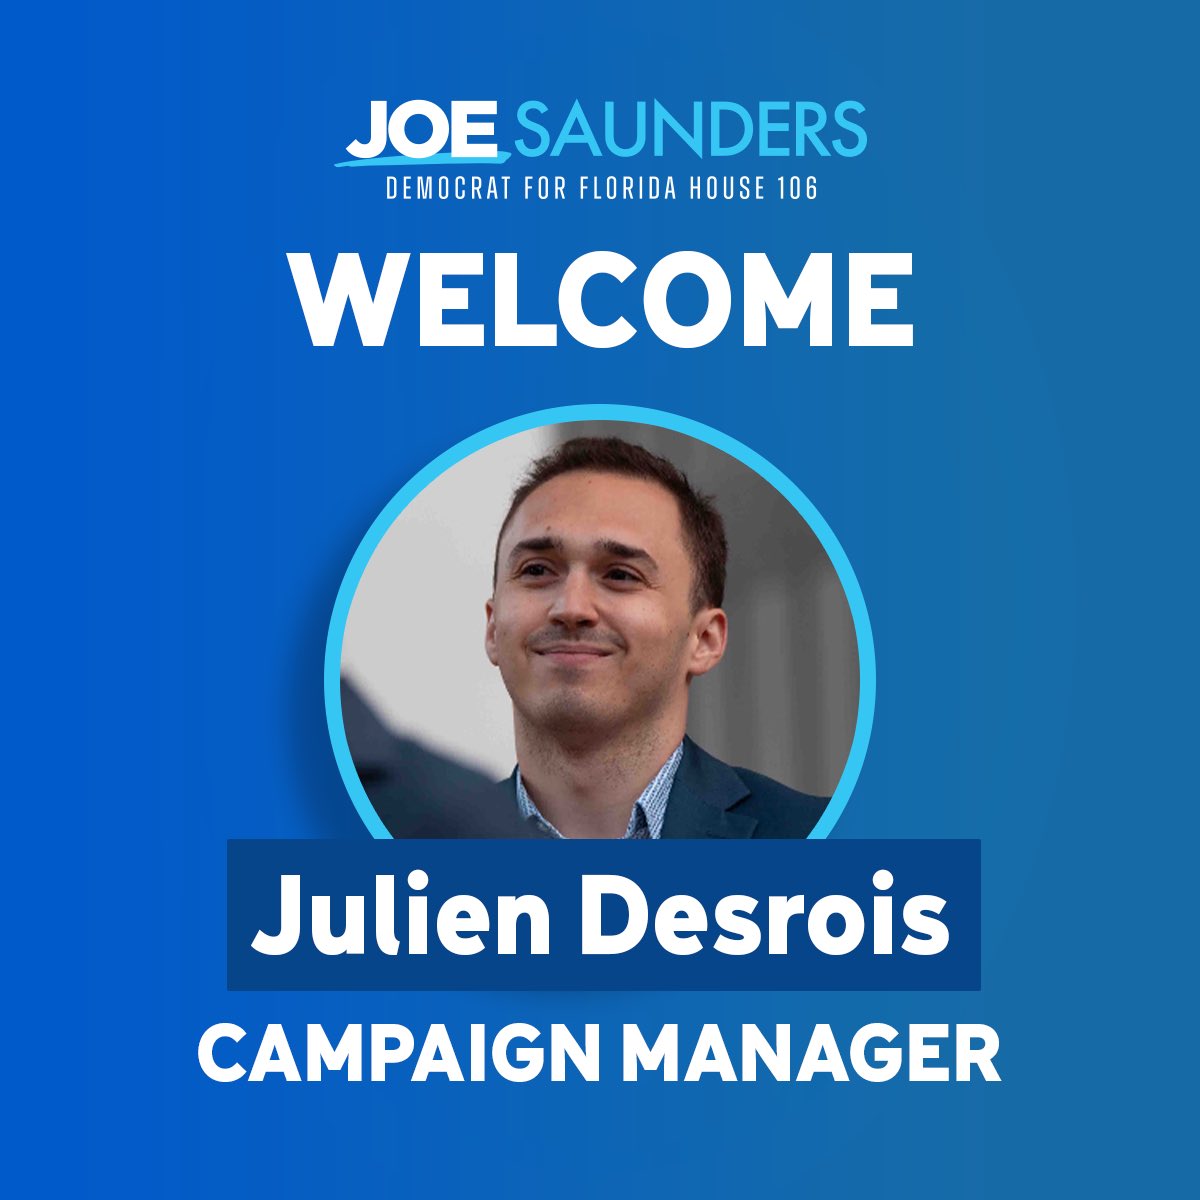 ANNOUNCEMENT: #TeamJoe is growing! I am so excited to announce our new campaign manager, Julien Desrois! Raised in HD 106 in an Aventura labor family (shout out @unitehere Local 355!) Julien joins our team w/ rich experience managing campaigns that move voters. Welcome, Julien!